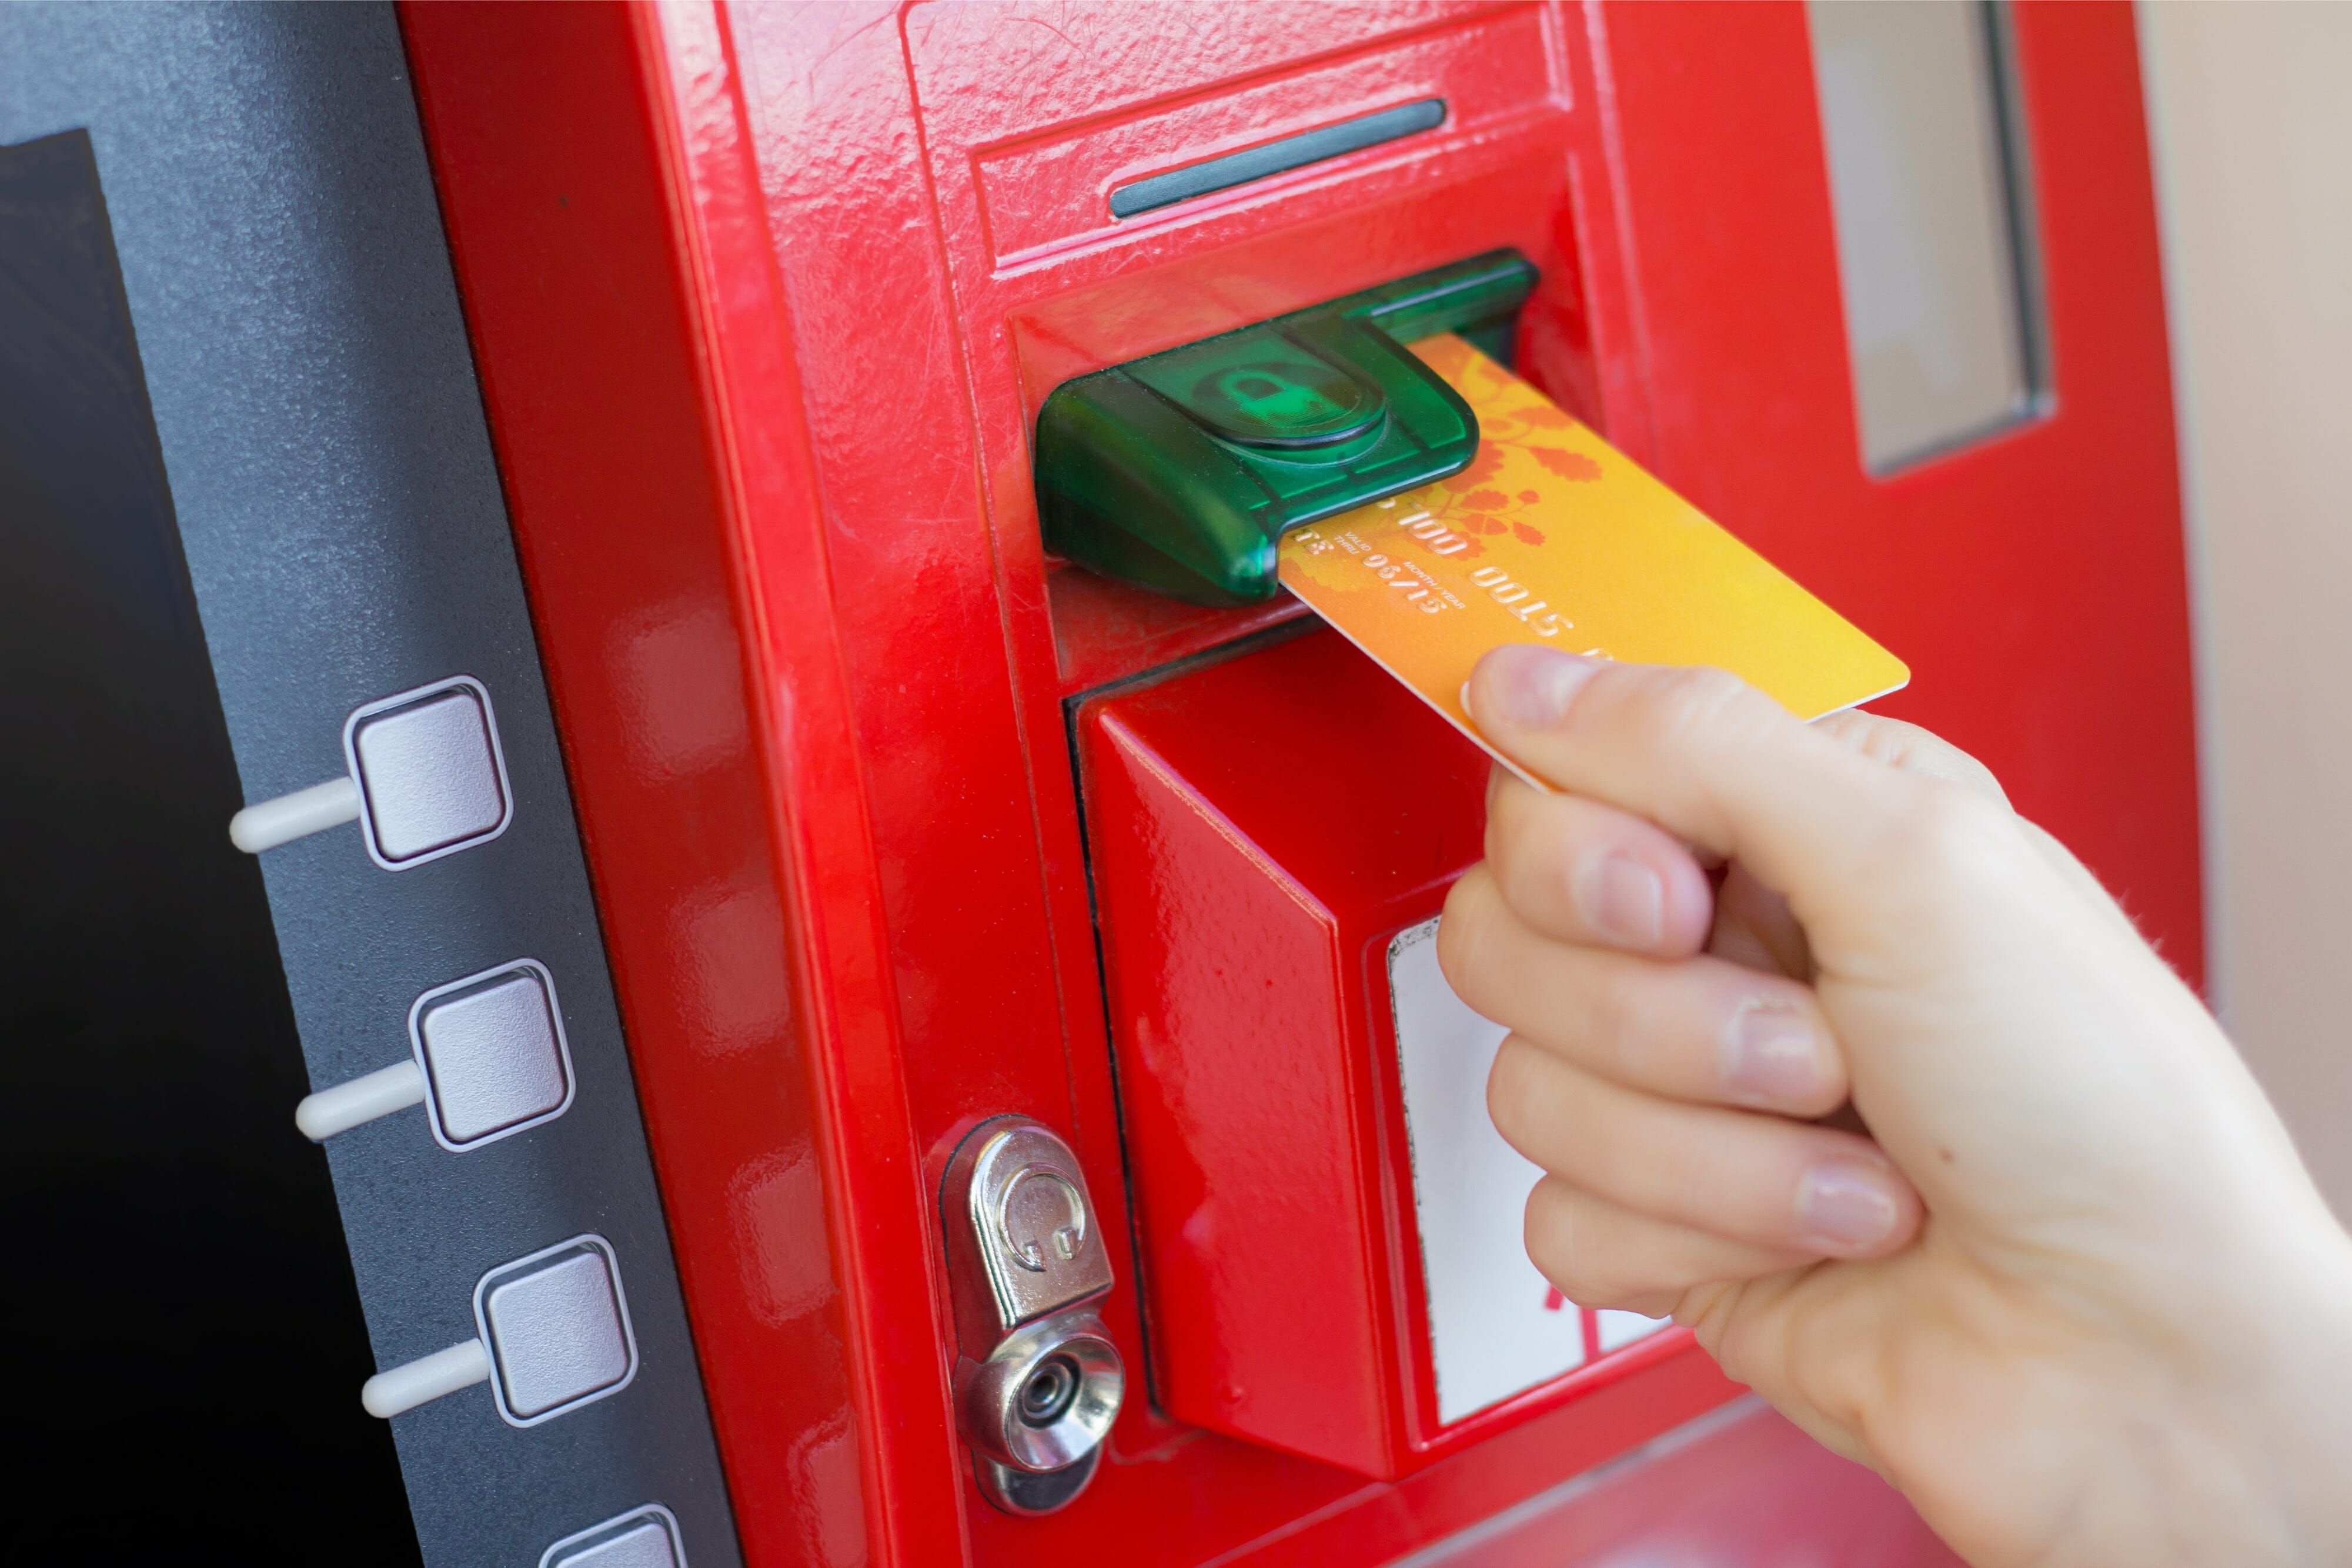 Inserting credit card into ATM